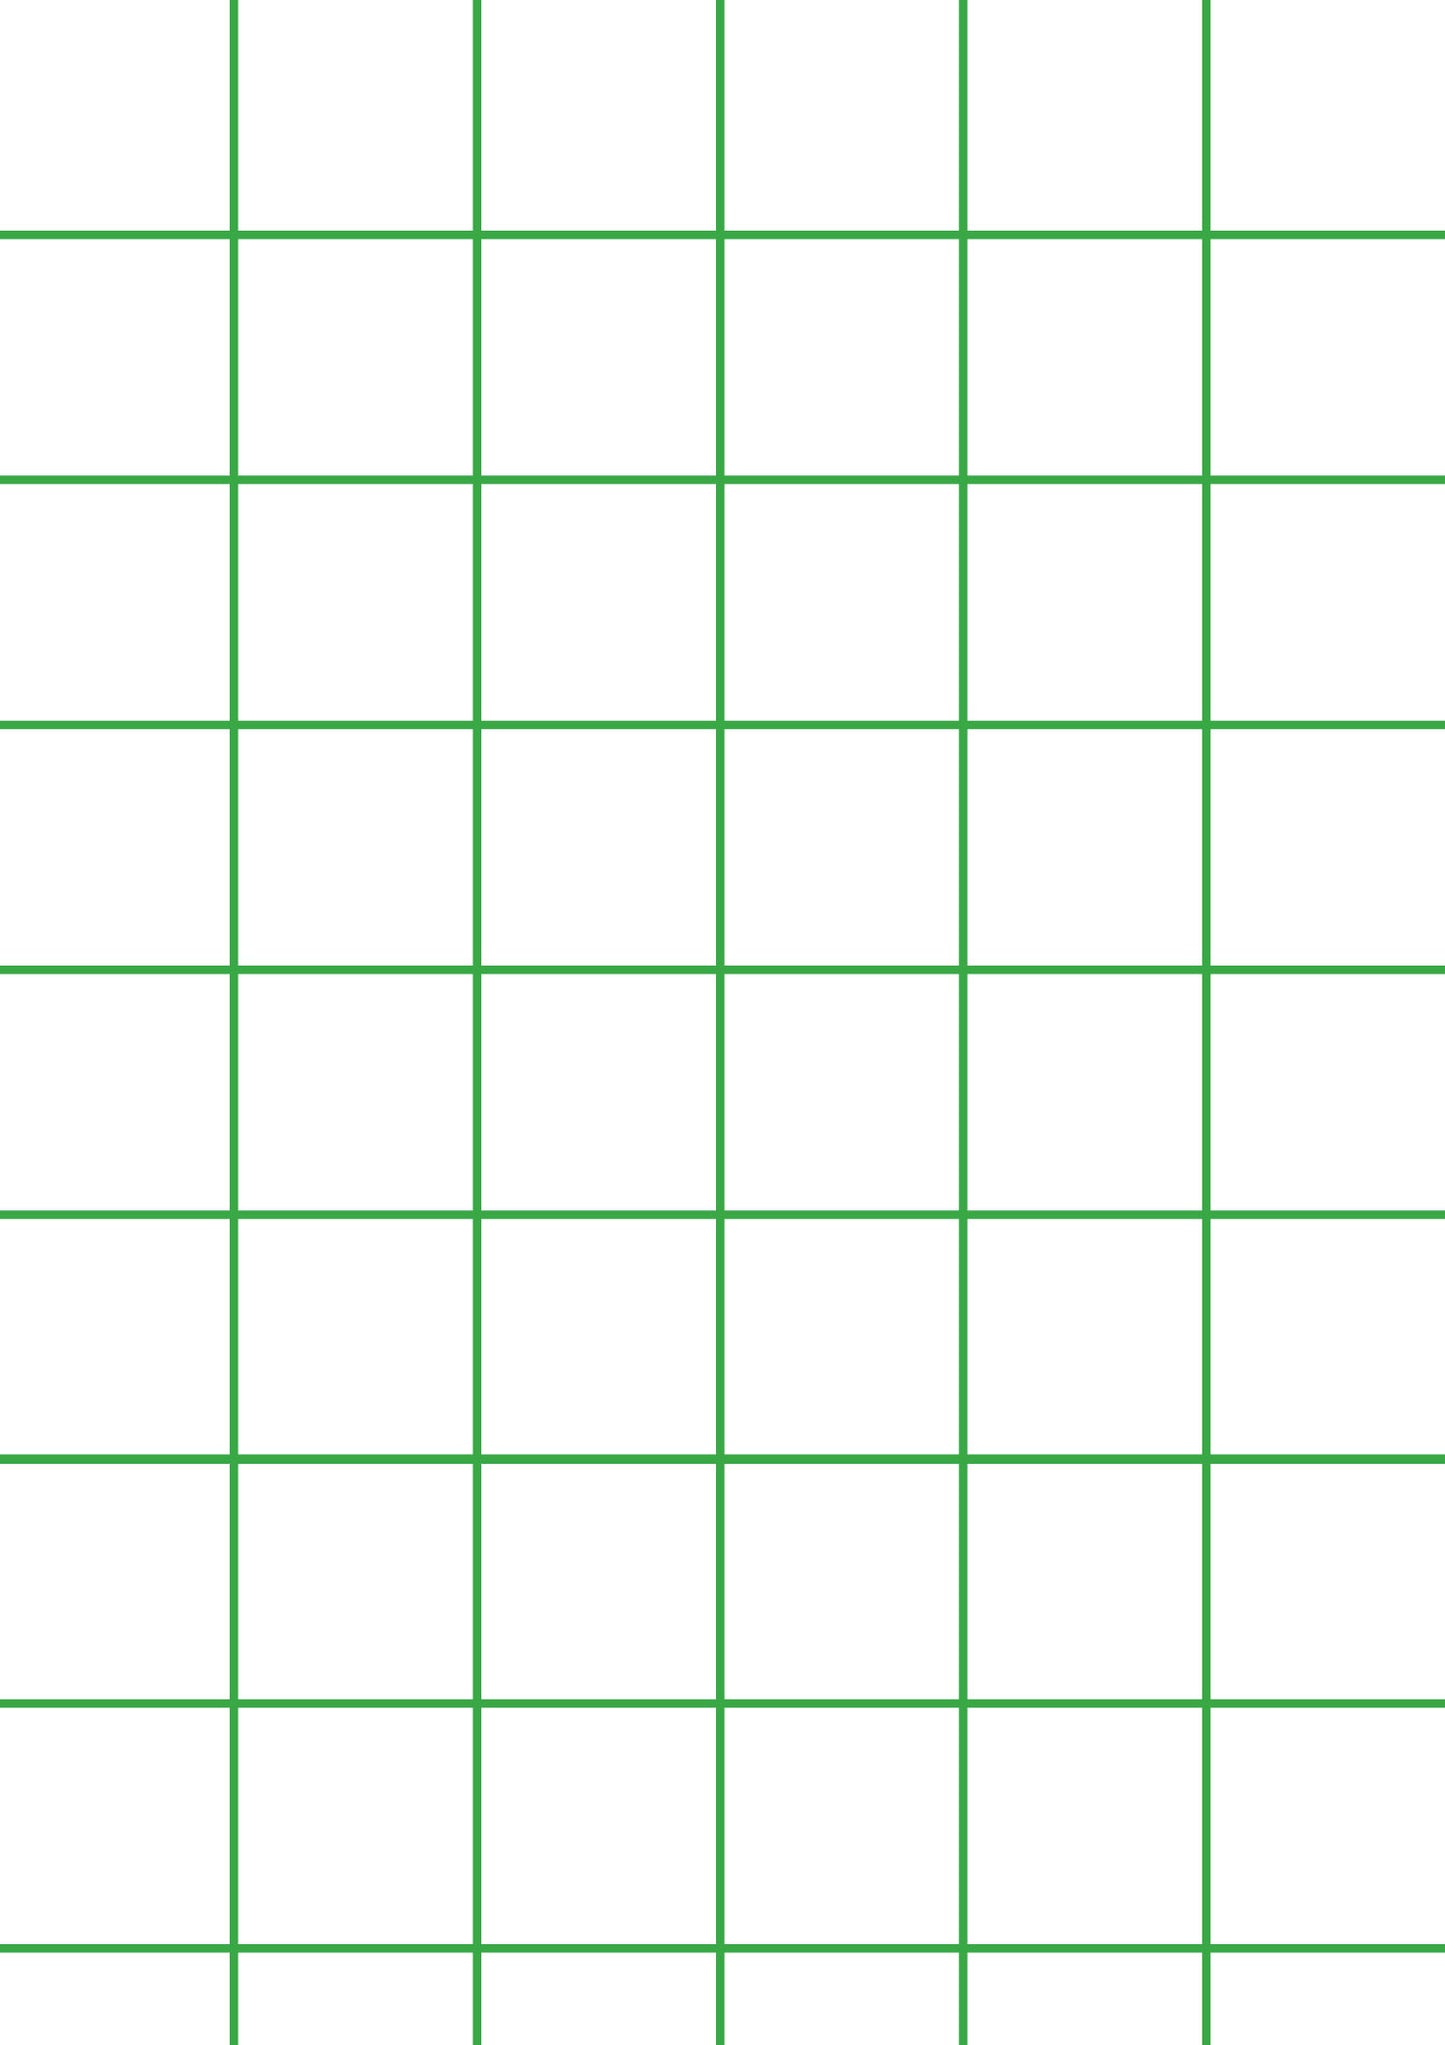 White A1 Photography Backdrop - Green Grid